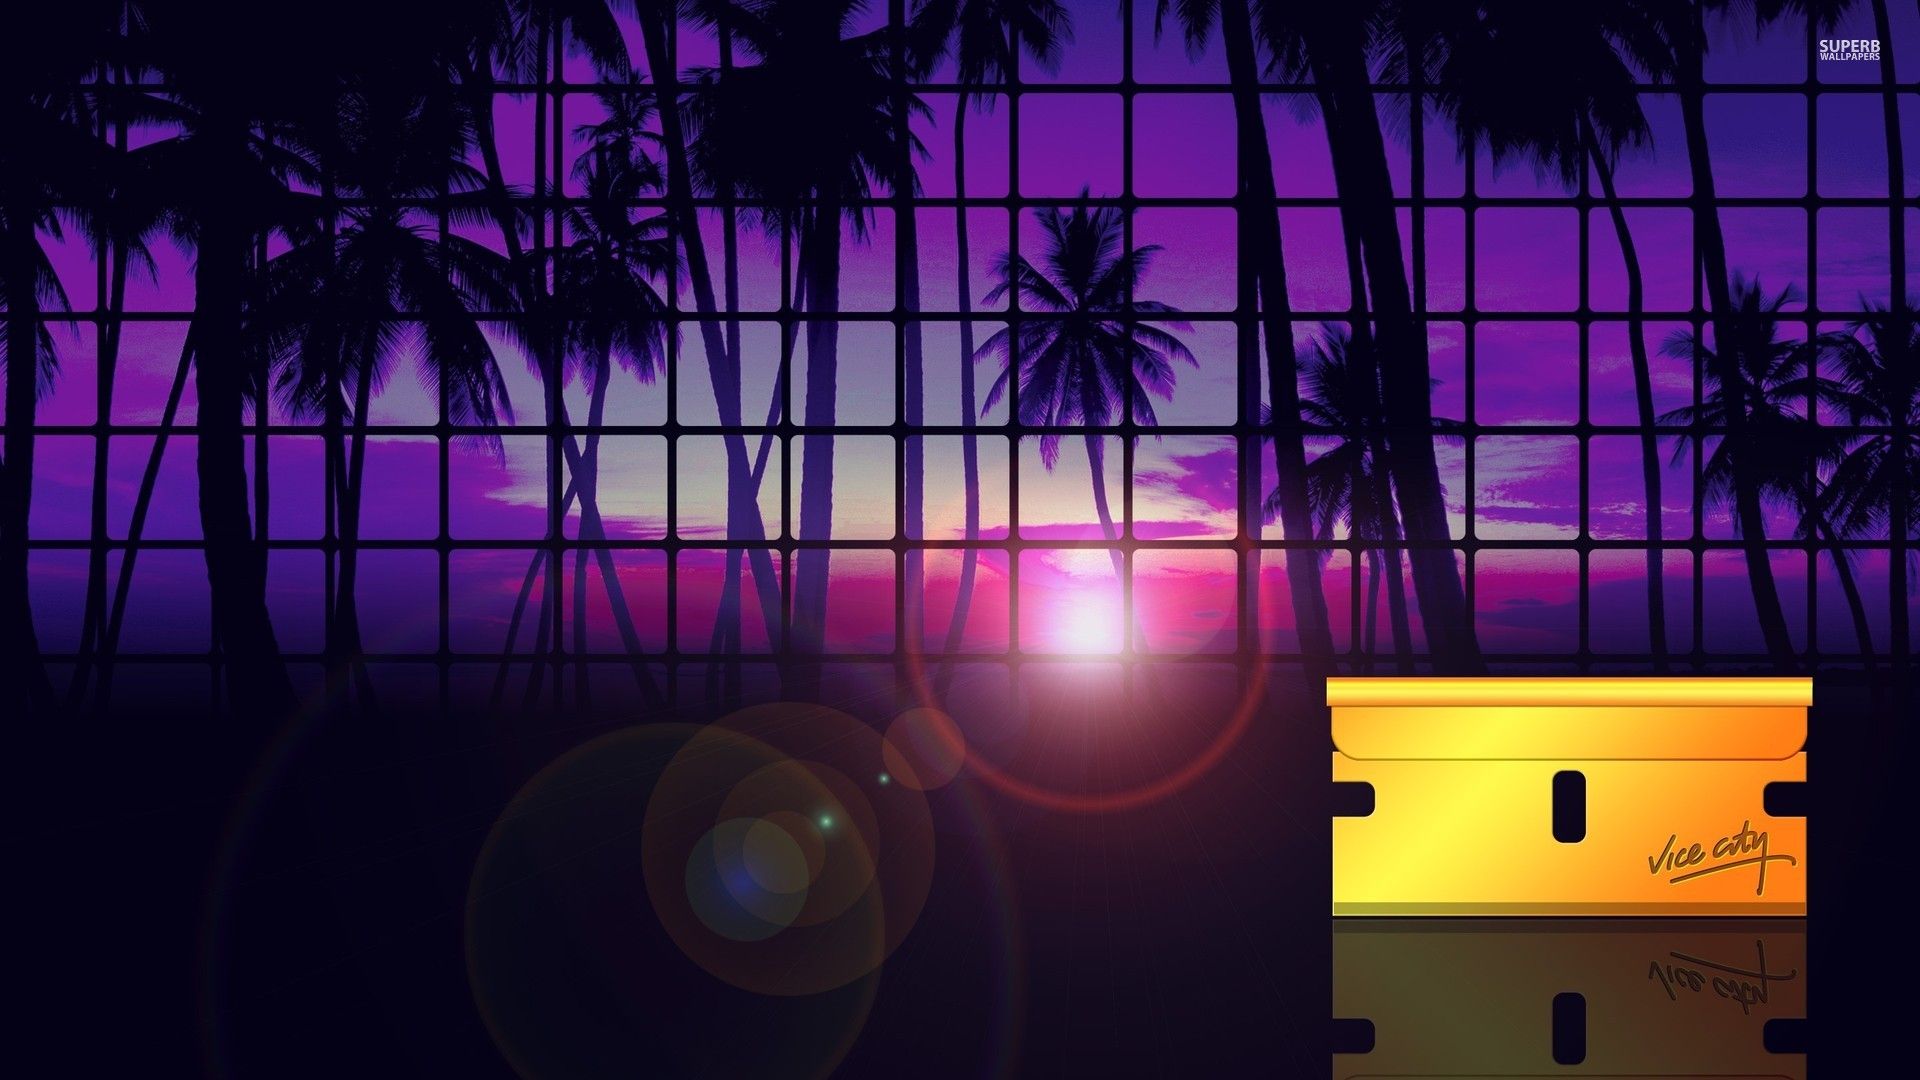 Grand Theft Auto Vice City sunset wallpaper - Game wallpapers